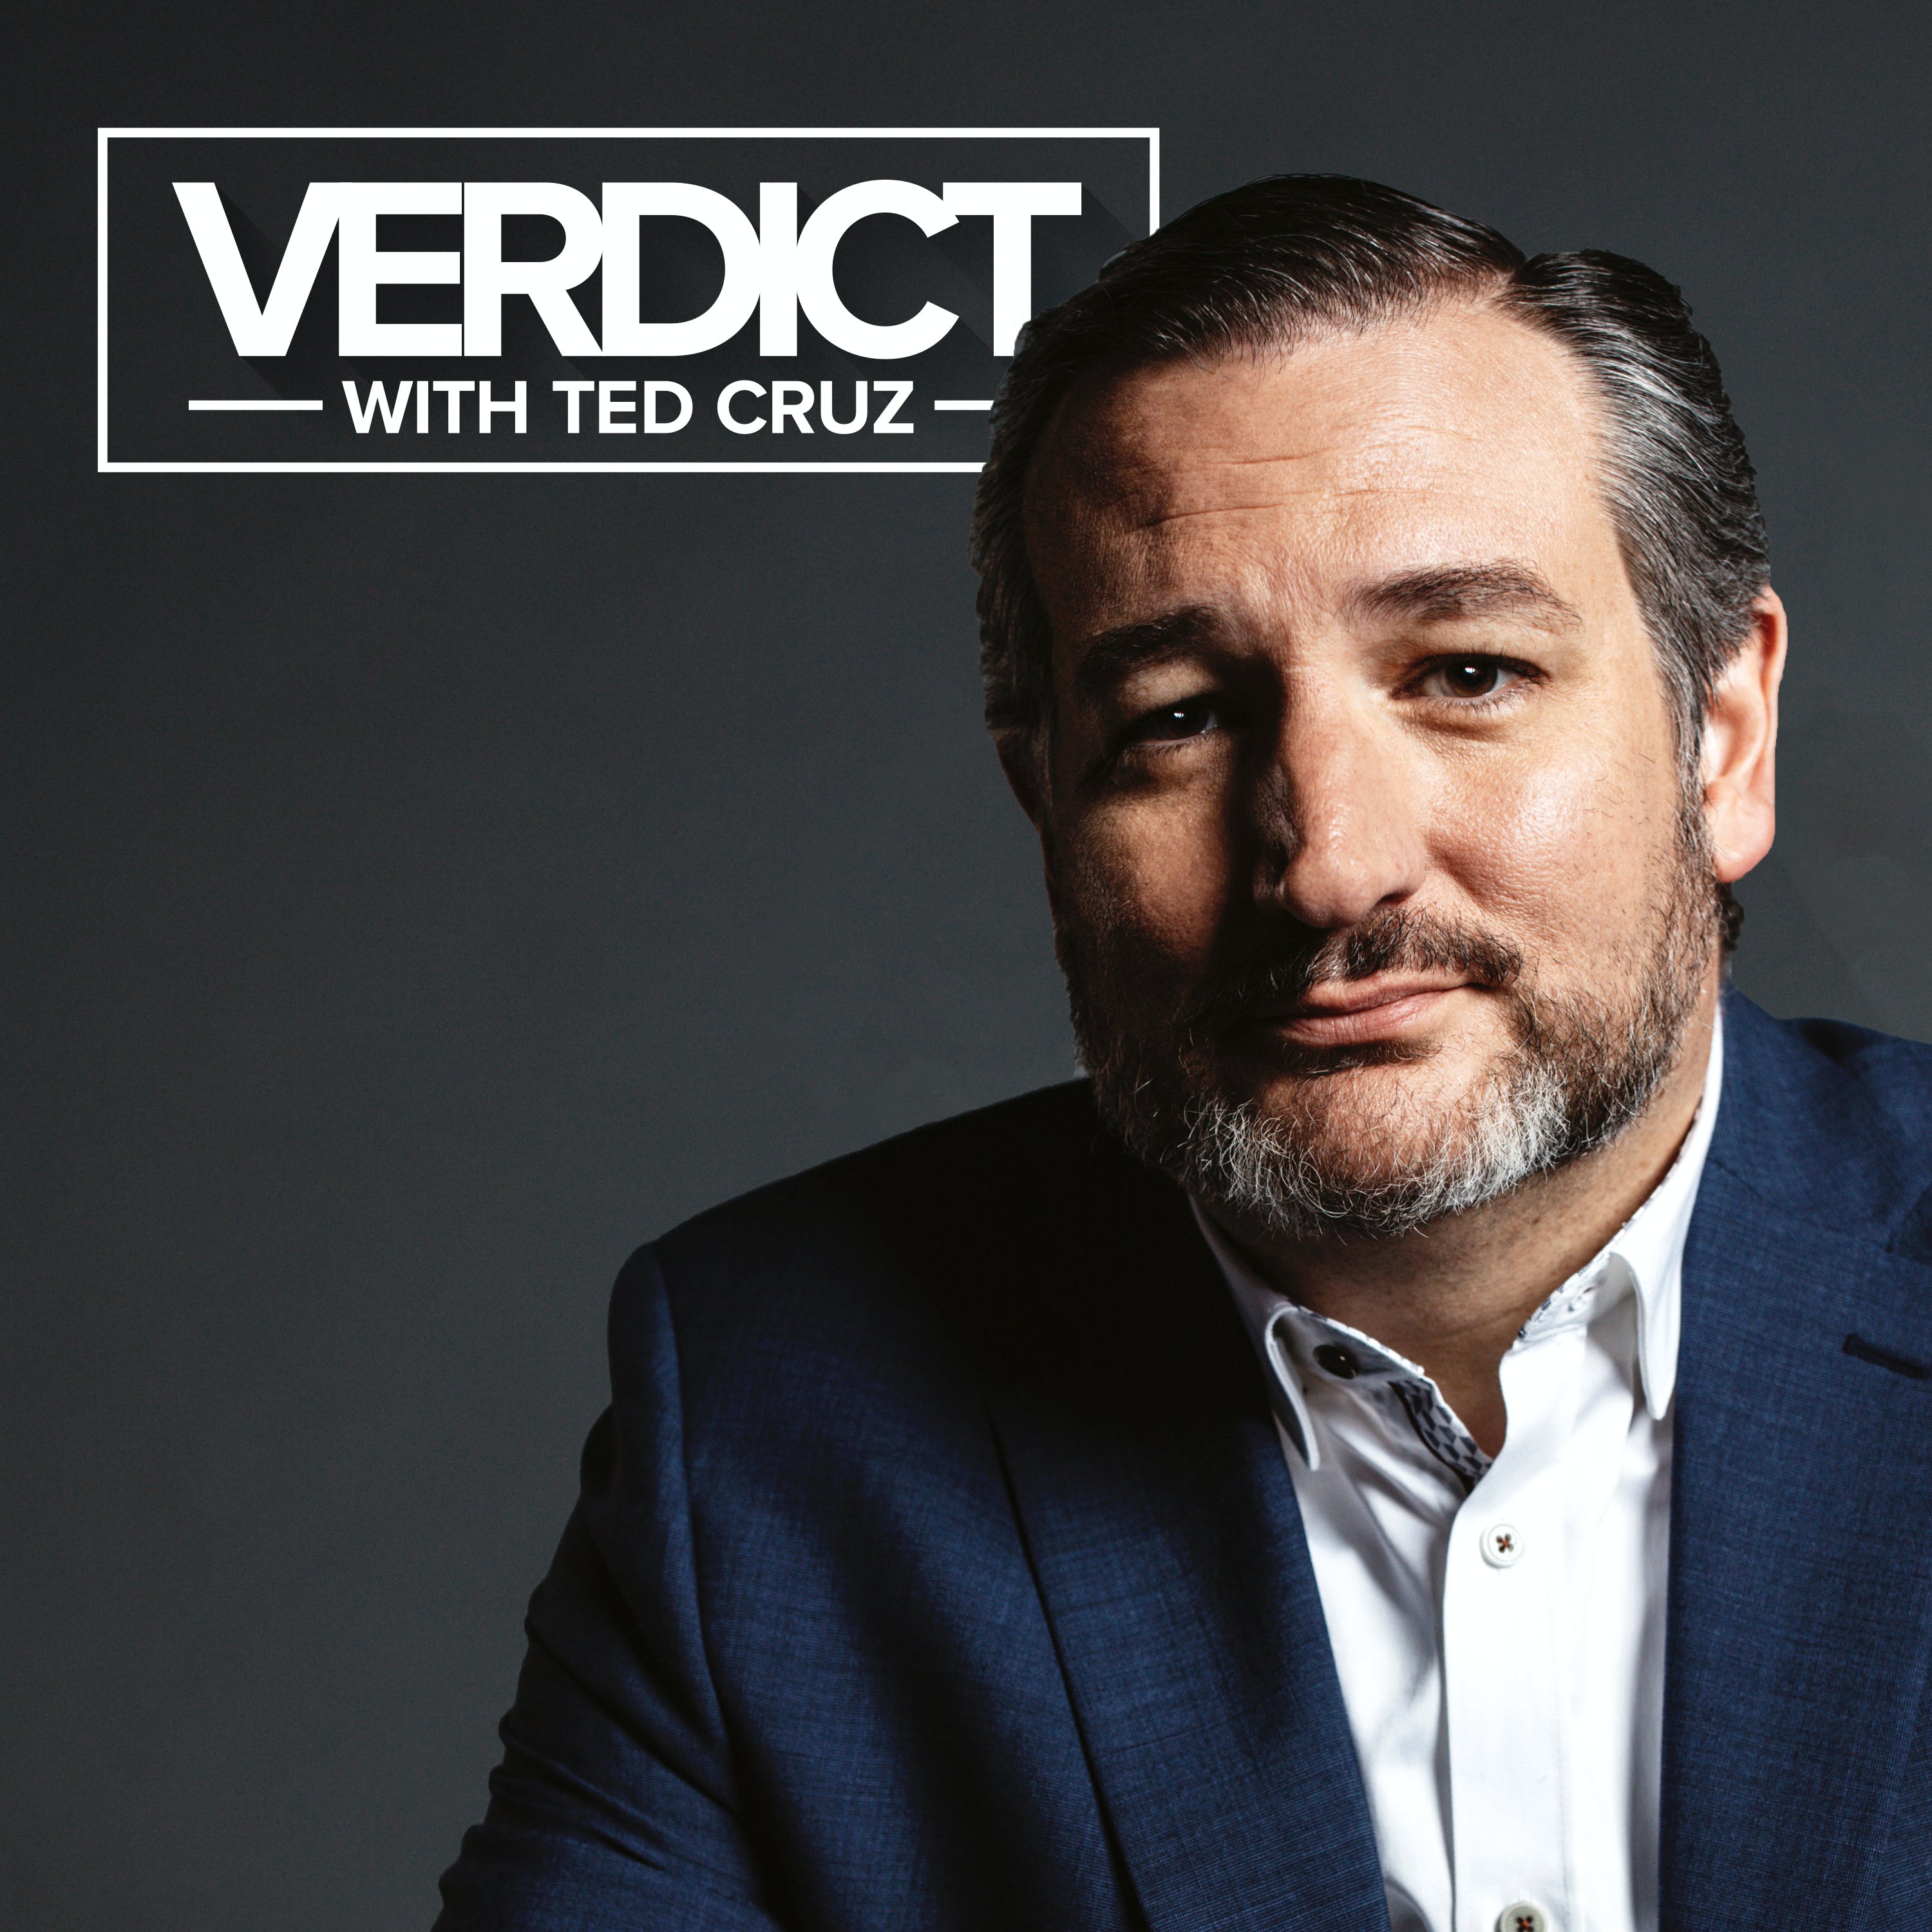 Corporate Wokeism Hits Elon, Sen Ted Cruz Takes on FBI Dir Christopher Wray, plus Van Orden v. Perry-Remembering Justice Sandra Day O'Connor the Week In Review